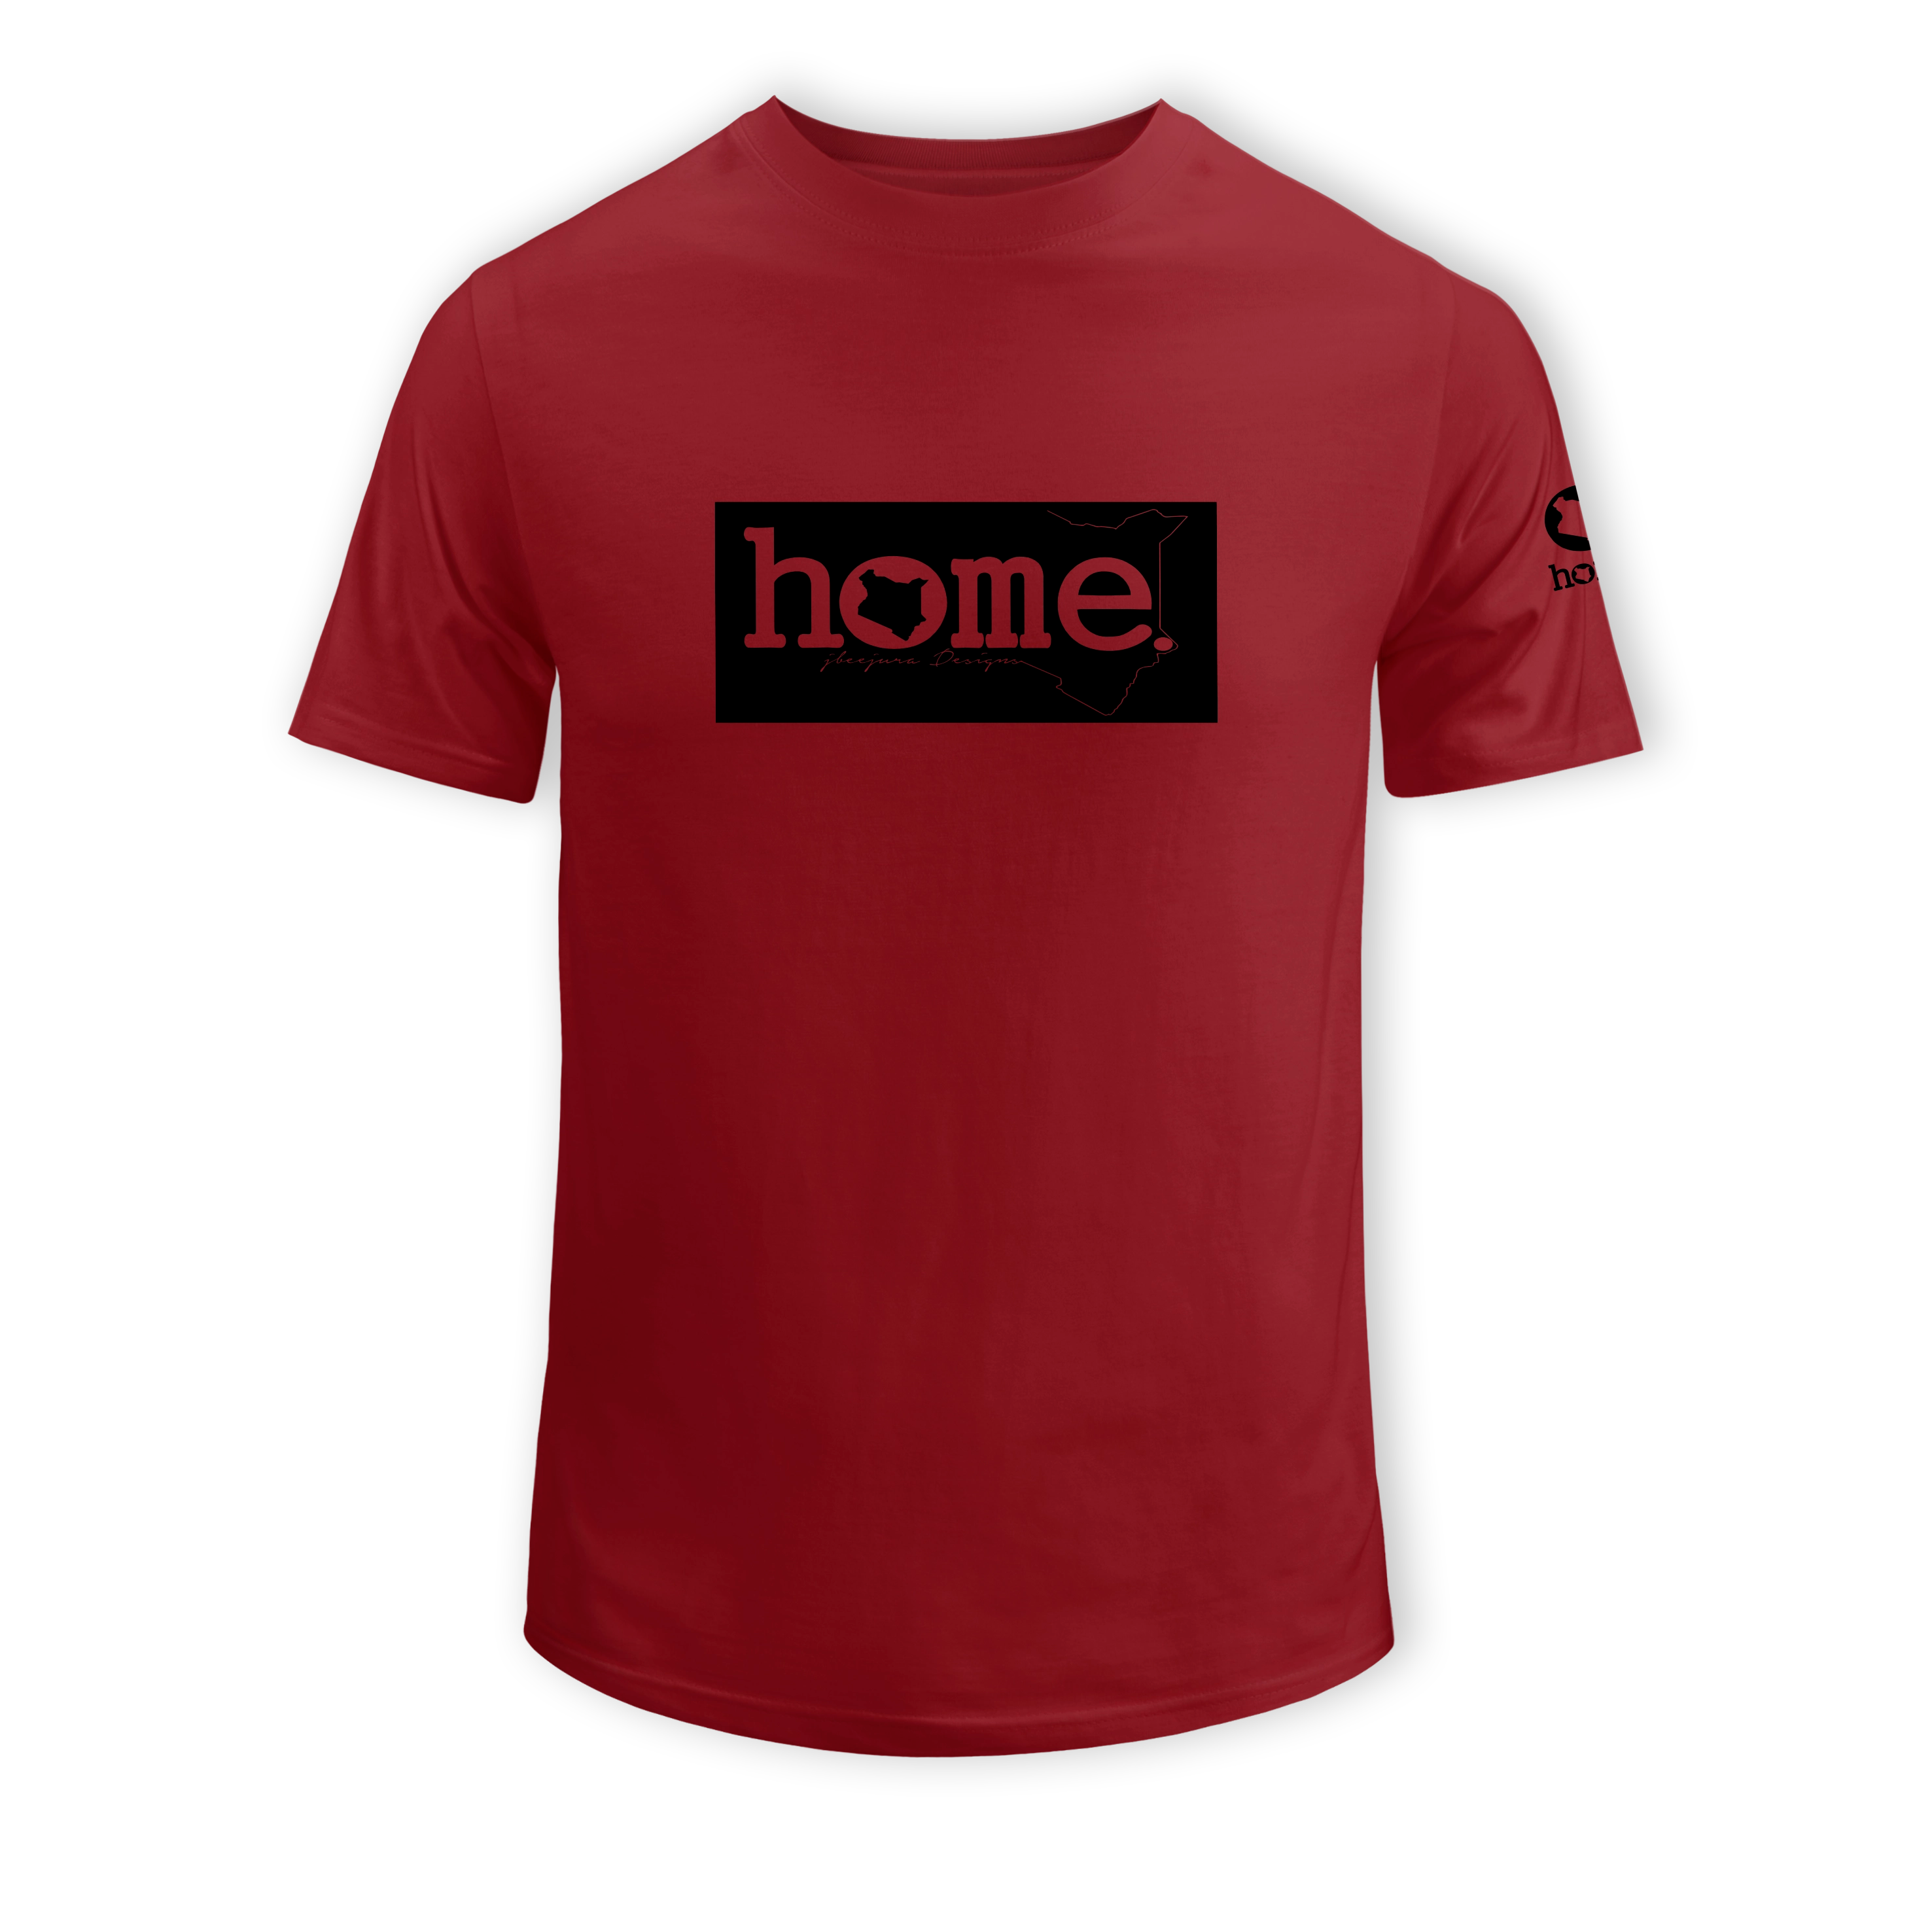 home_254 KIDS SHORT-SLEEVED MAROON RED T-SHIRT WITH A BLACK CLASSIC PRINT – COTTON PLUS FABRIC